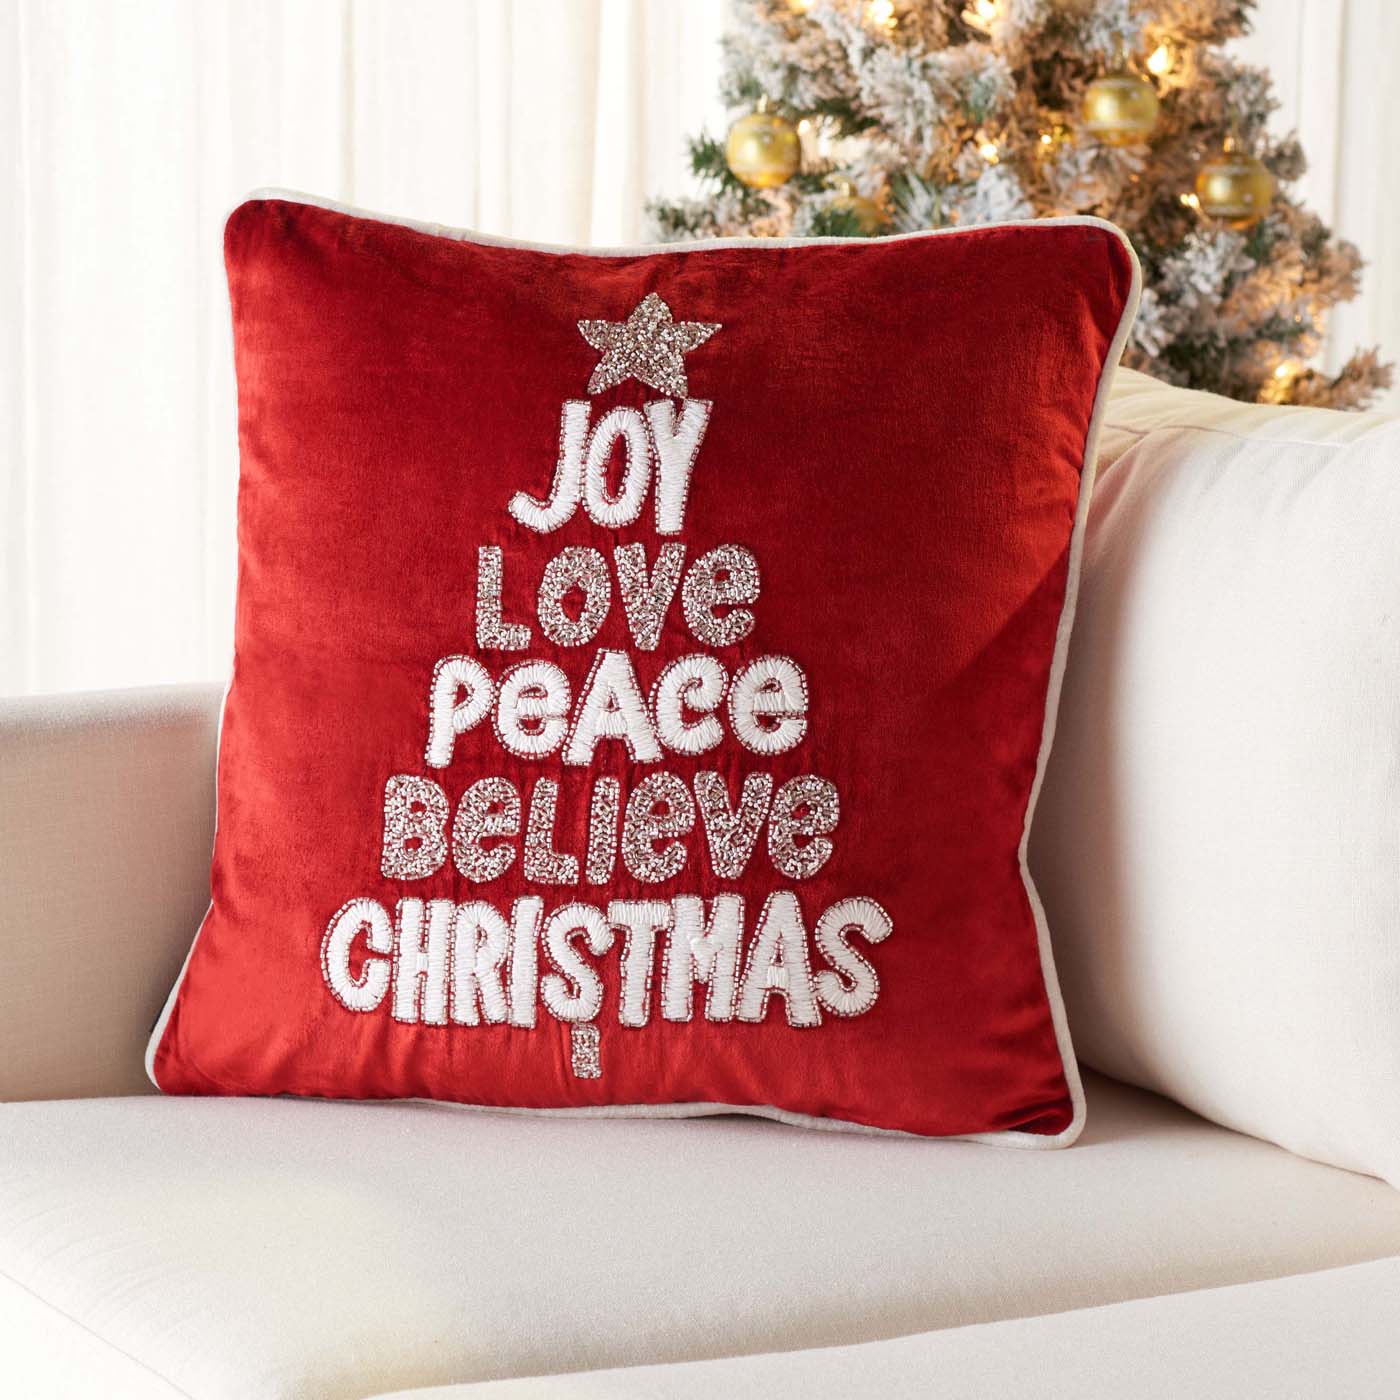 Safavieh Peace And Joy Pillow , HOL4008 - Red / White